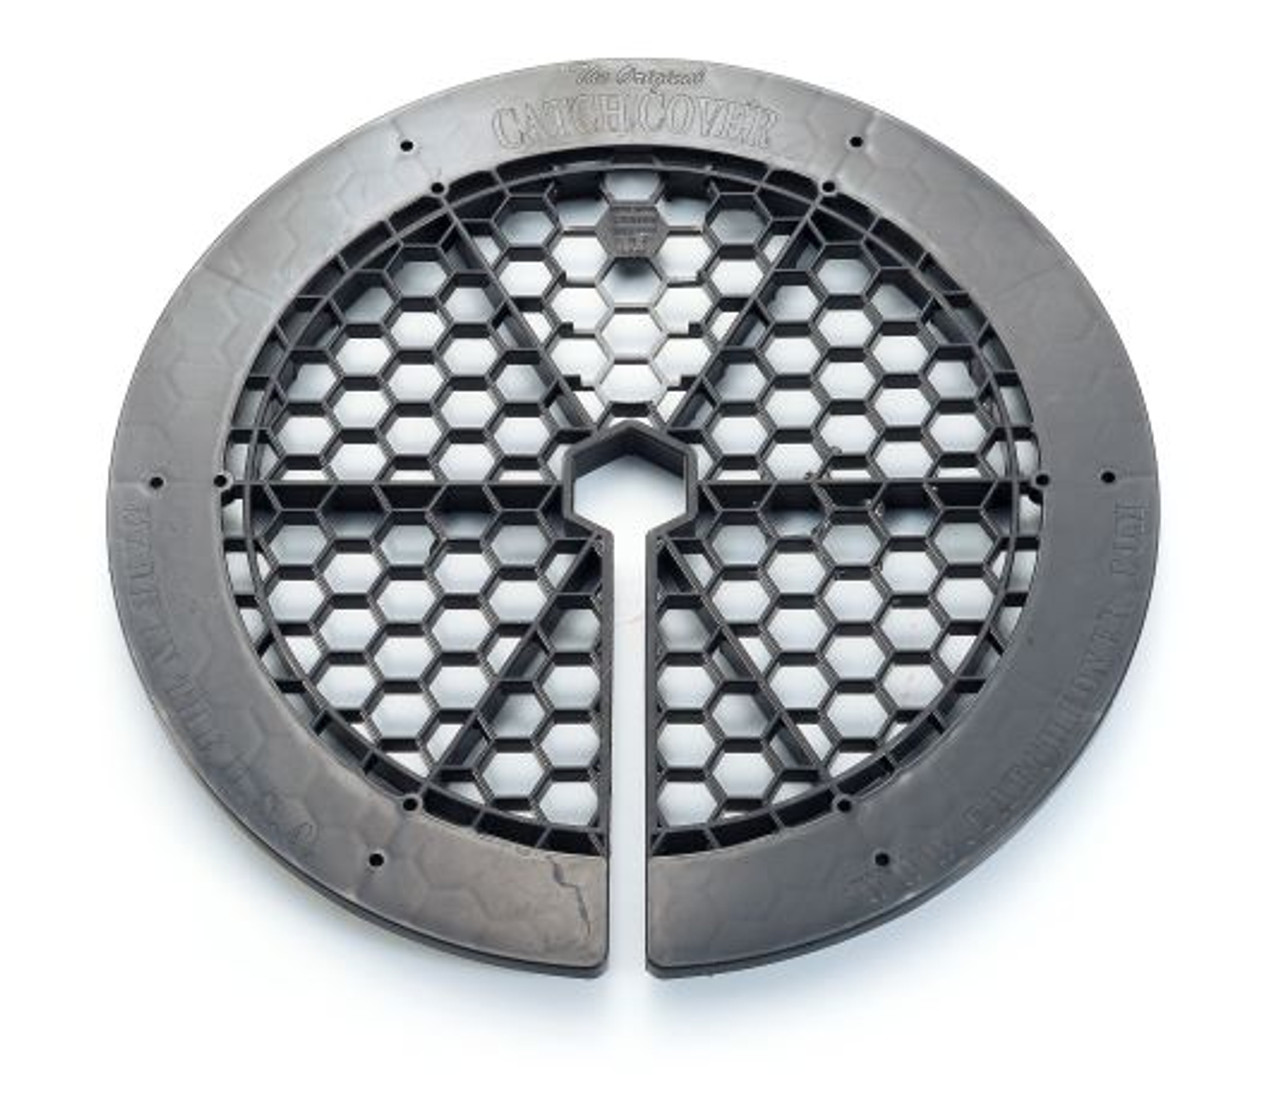 4 Catch Cover BRAND Round Ice Hole Covers Fish House Castle Cc01 Ship for sale online 